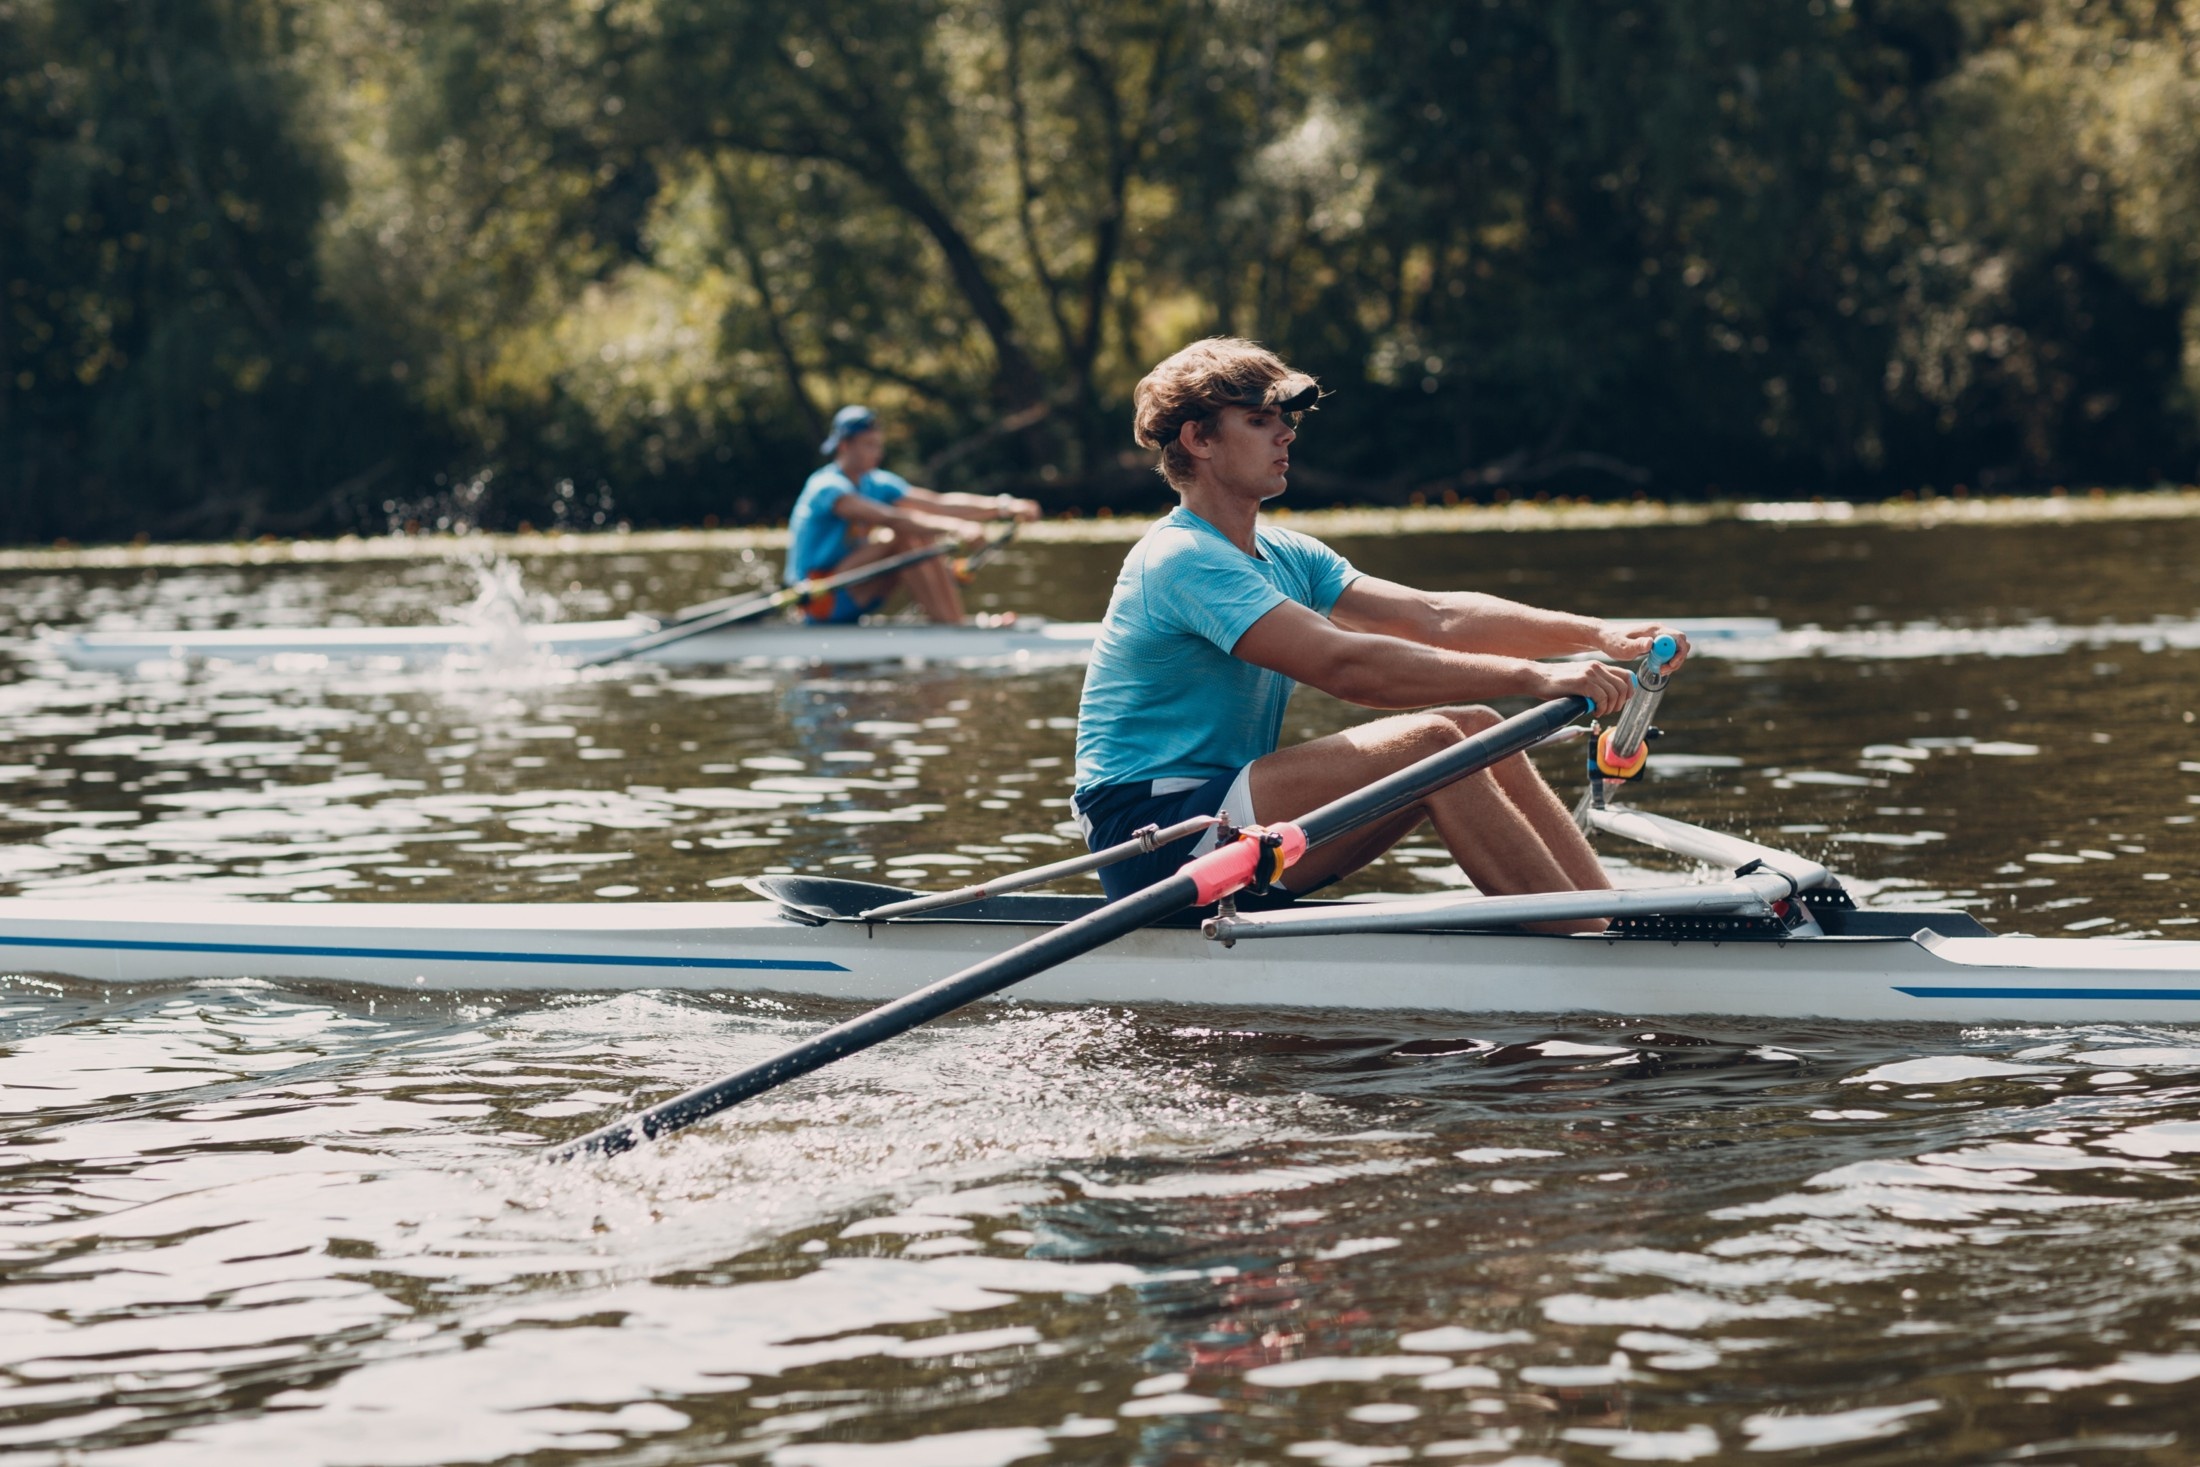 Rowing: A couple of scullers during a trip on a wide river, Recreational and competitive water sport. 2200x1470 HD Wallpaper.